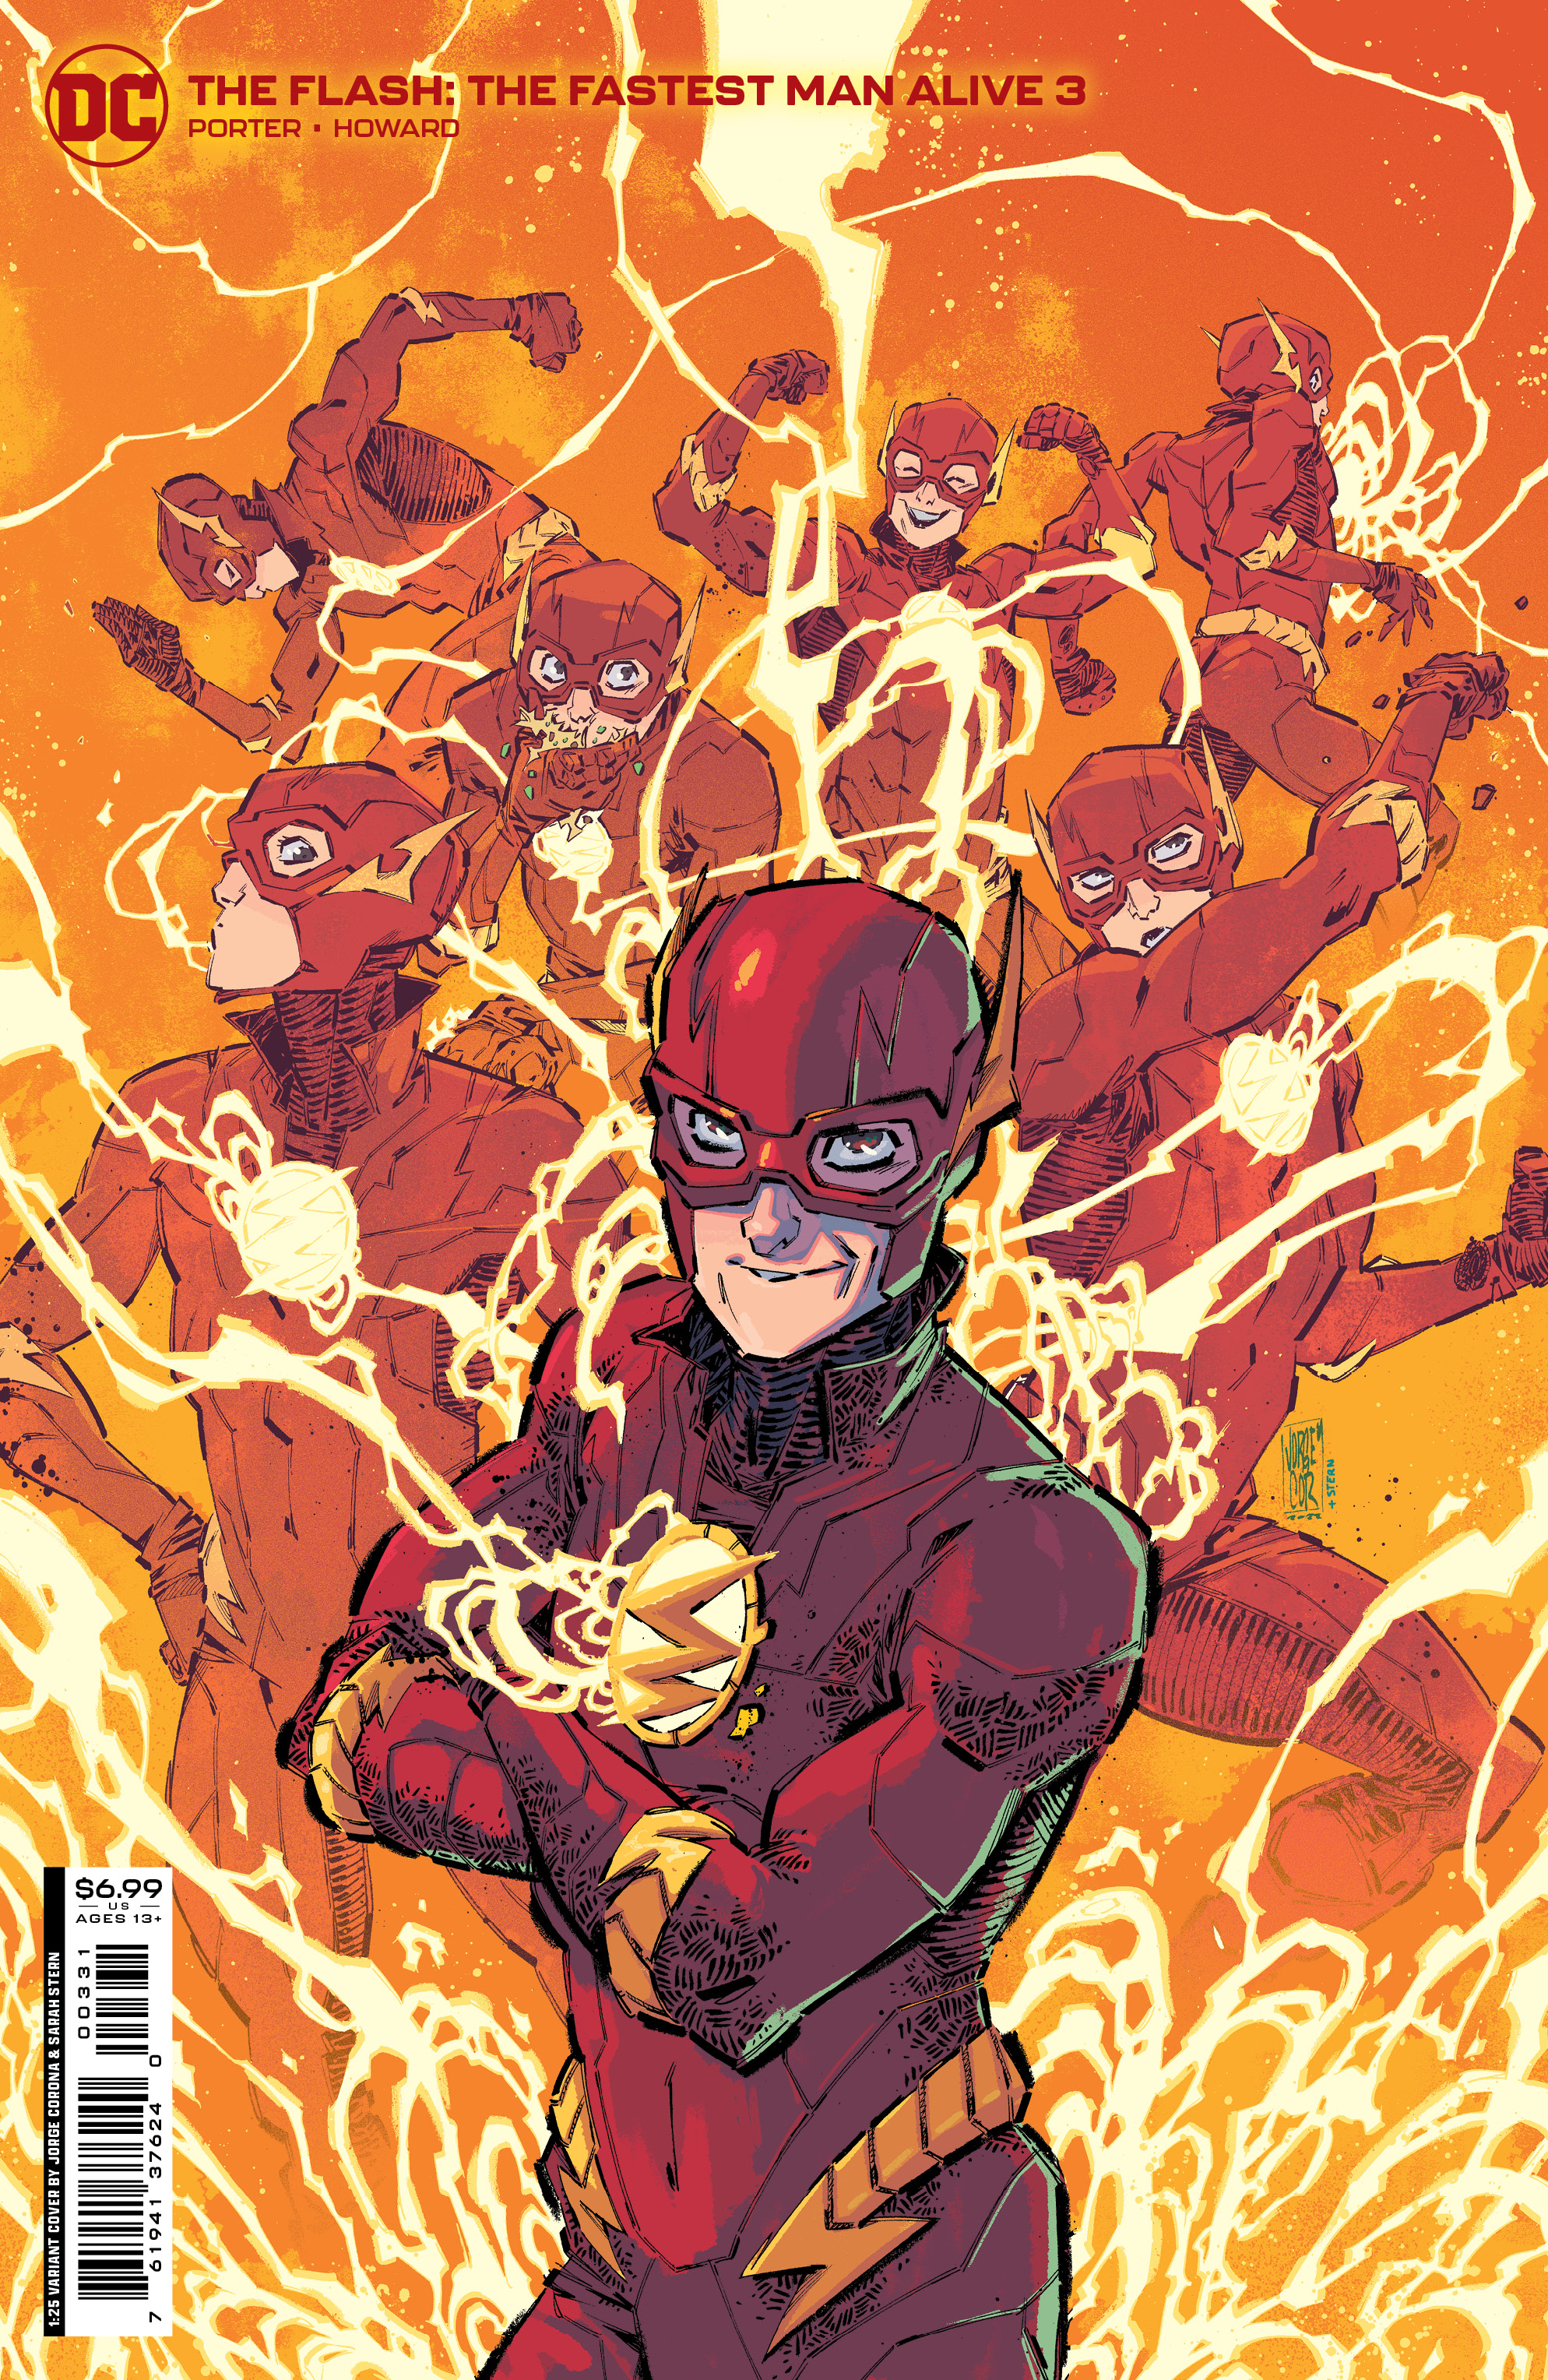 Flash The Fastest Man Alive #3 Cover C 1 for 25 Incentive Andy Muschietti Pencils Card Stock Variant (Of 3)